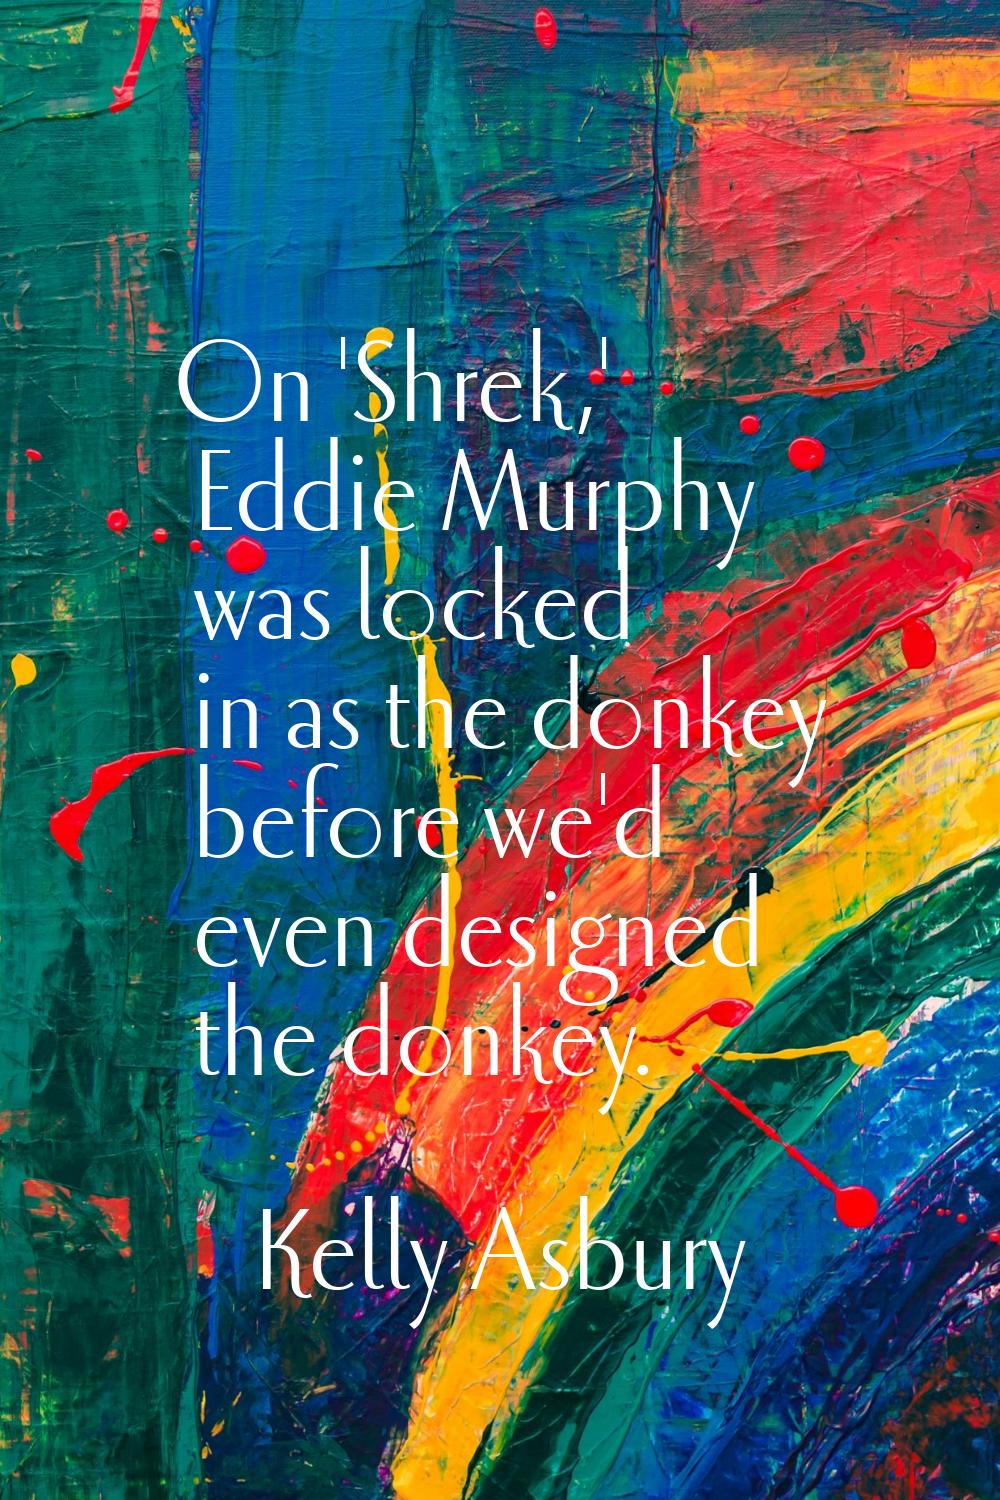 On 'Shrek,' Eddie Murphy was locked in as the donkey before we'd even designed the donkey.